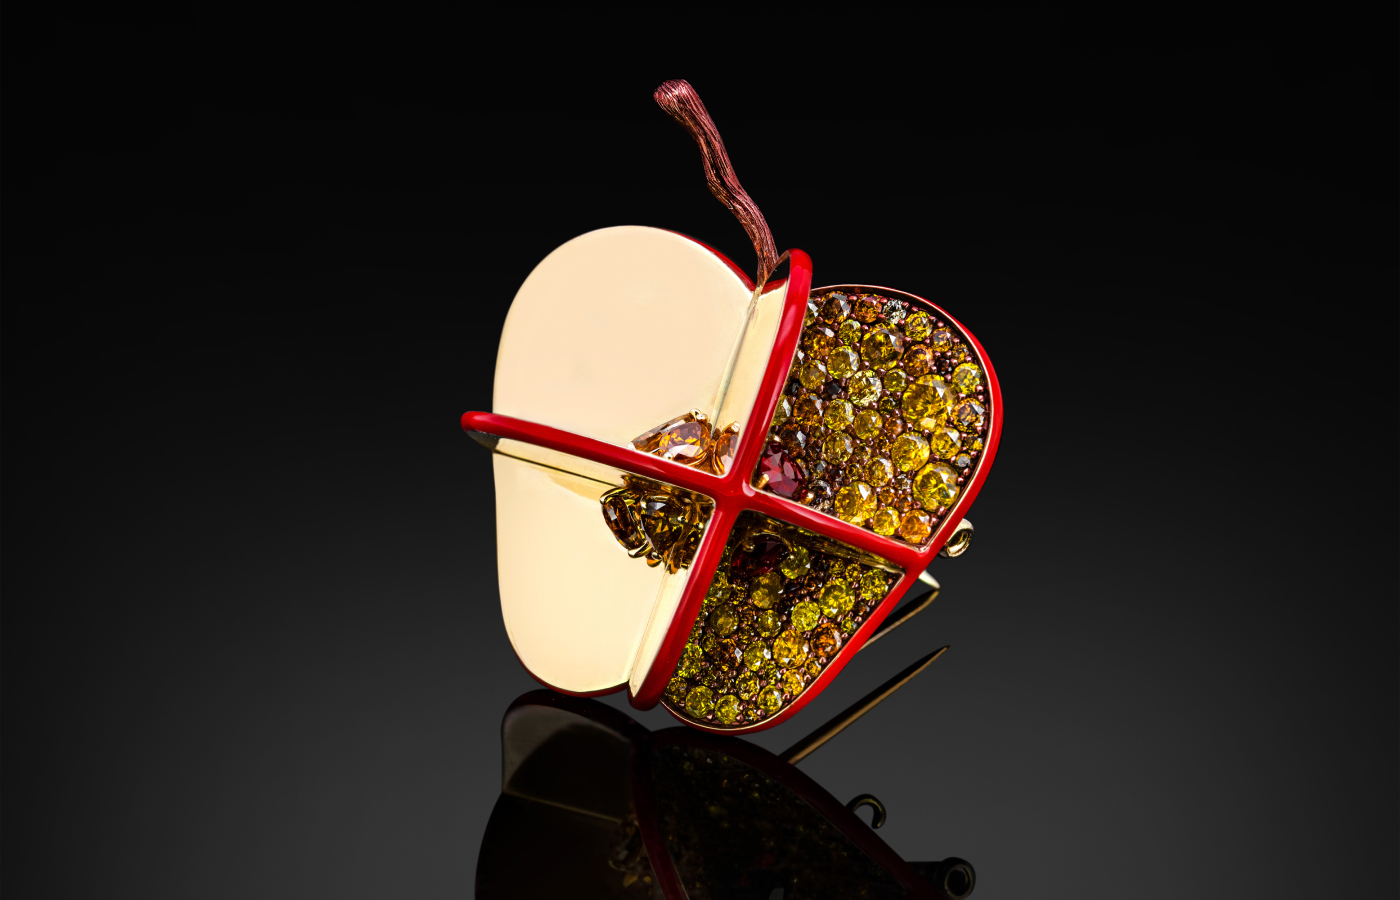 Austy Lee ‘The Apple of Singularity’ brooch from The Fruit du Désir collection in 18k yellow gold with Mozambican unheated rubies, red enamel and fancy colour diamonds